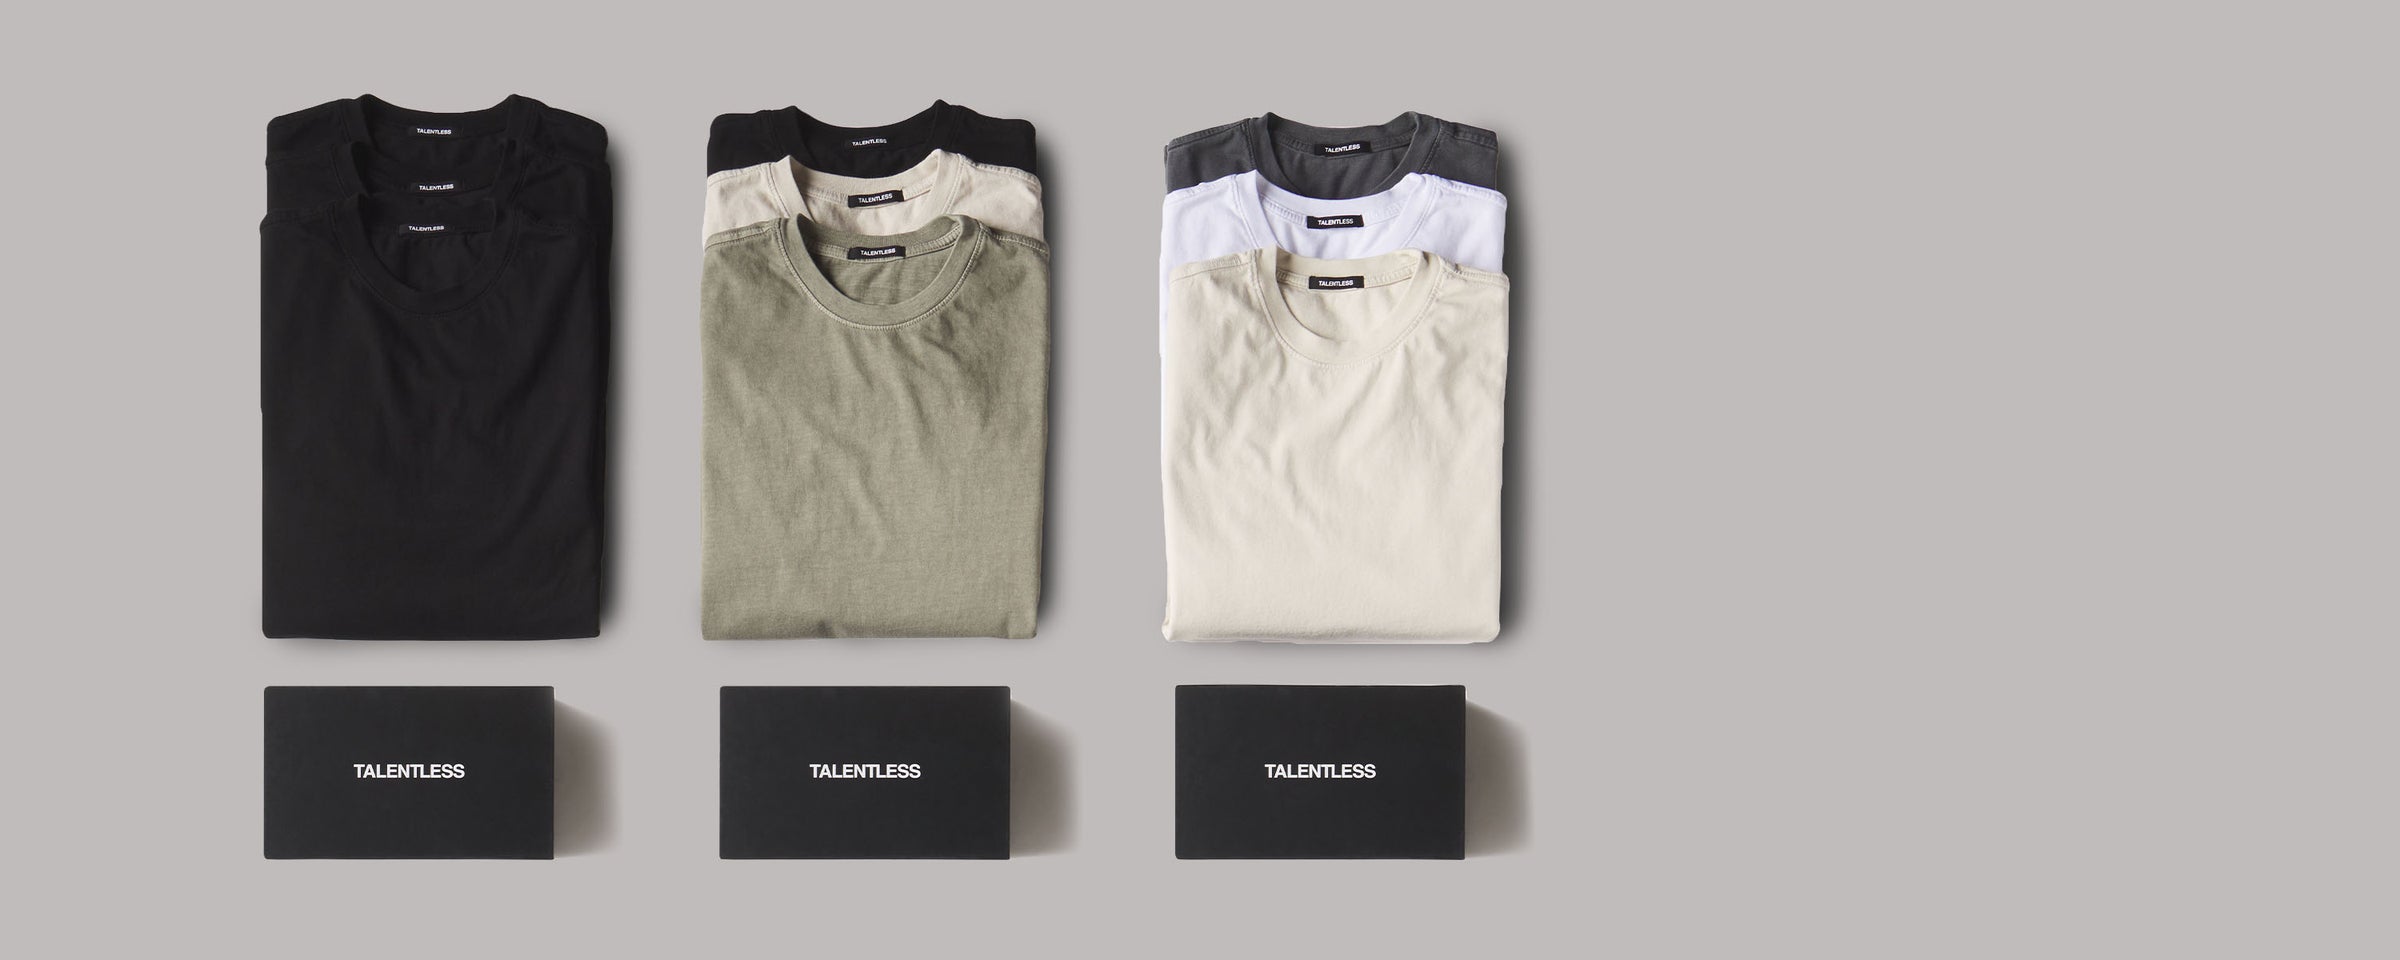 Men's 3 Pack tees showing three different color packs